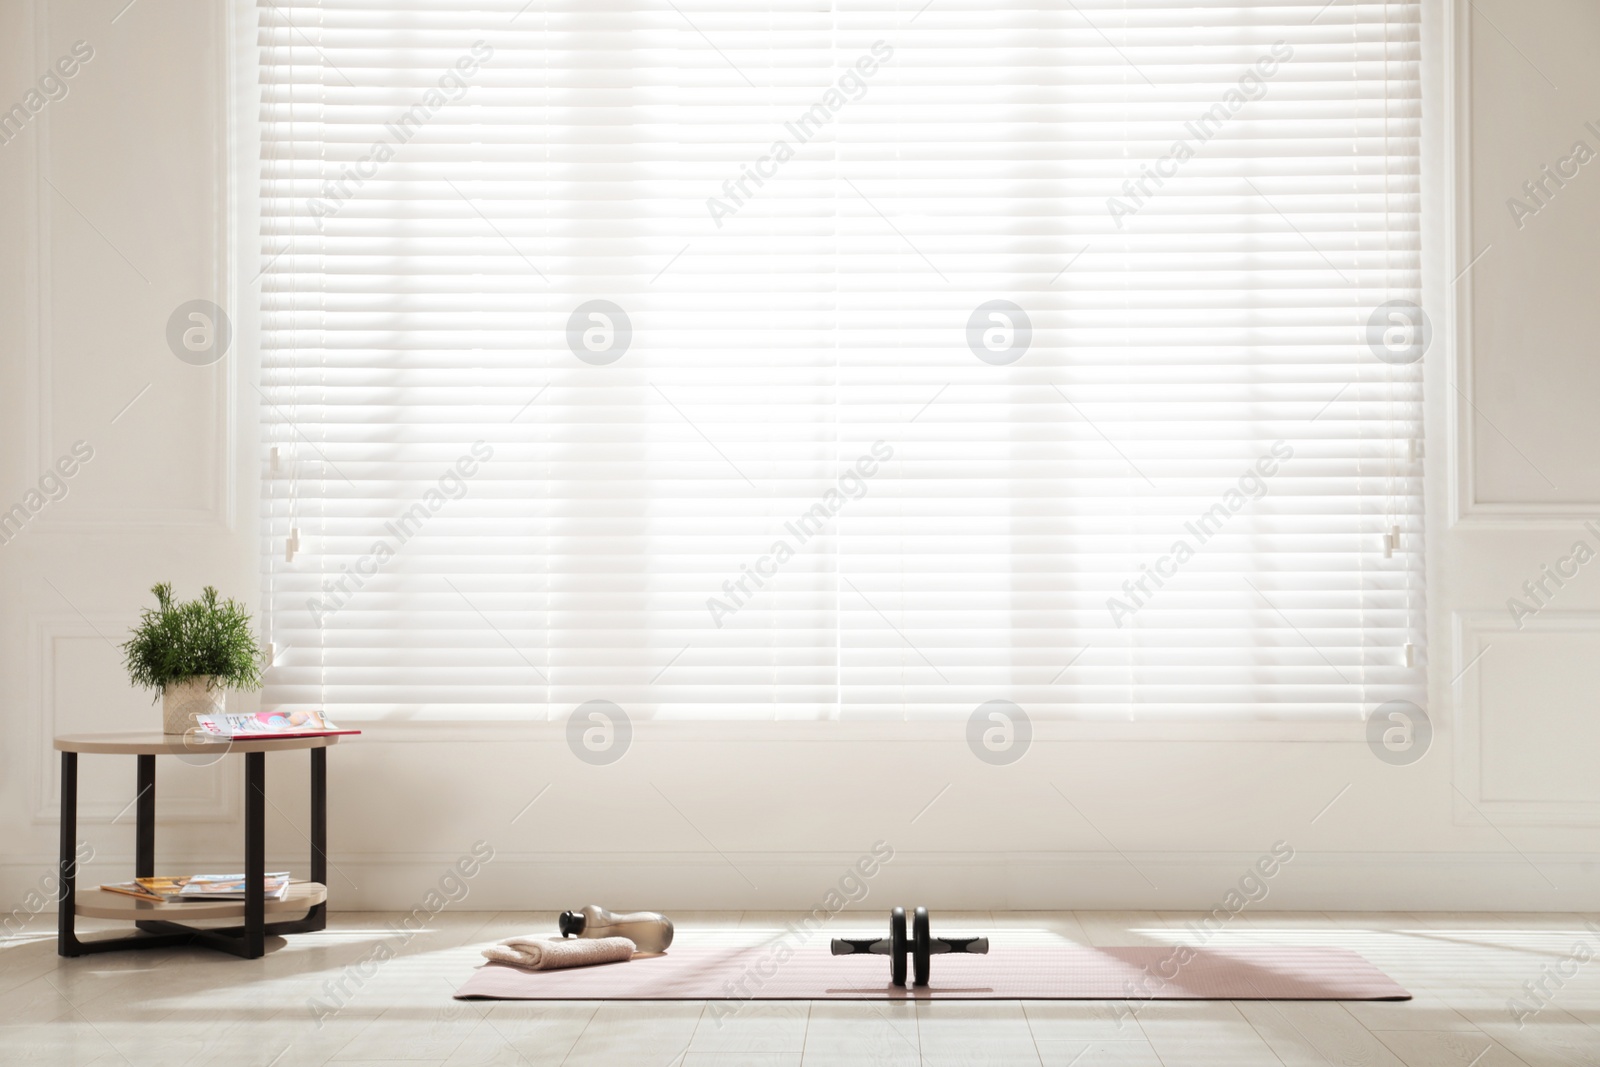 Photo of Exercise mat, ab roller, towel and bottle of water near window in spacious room